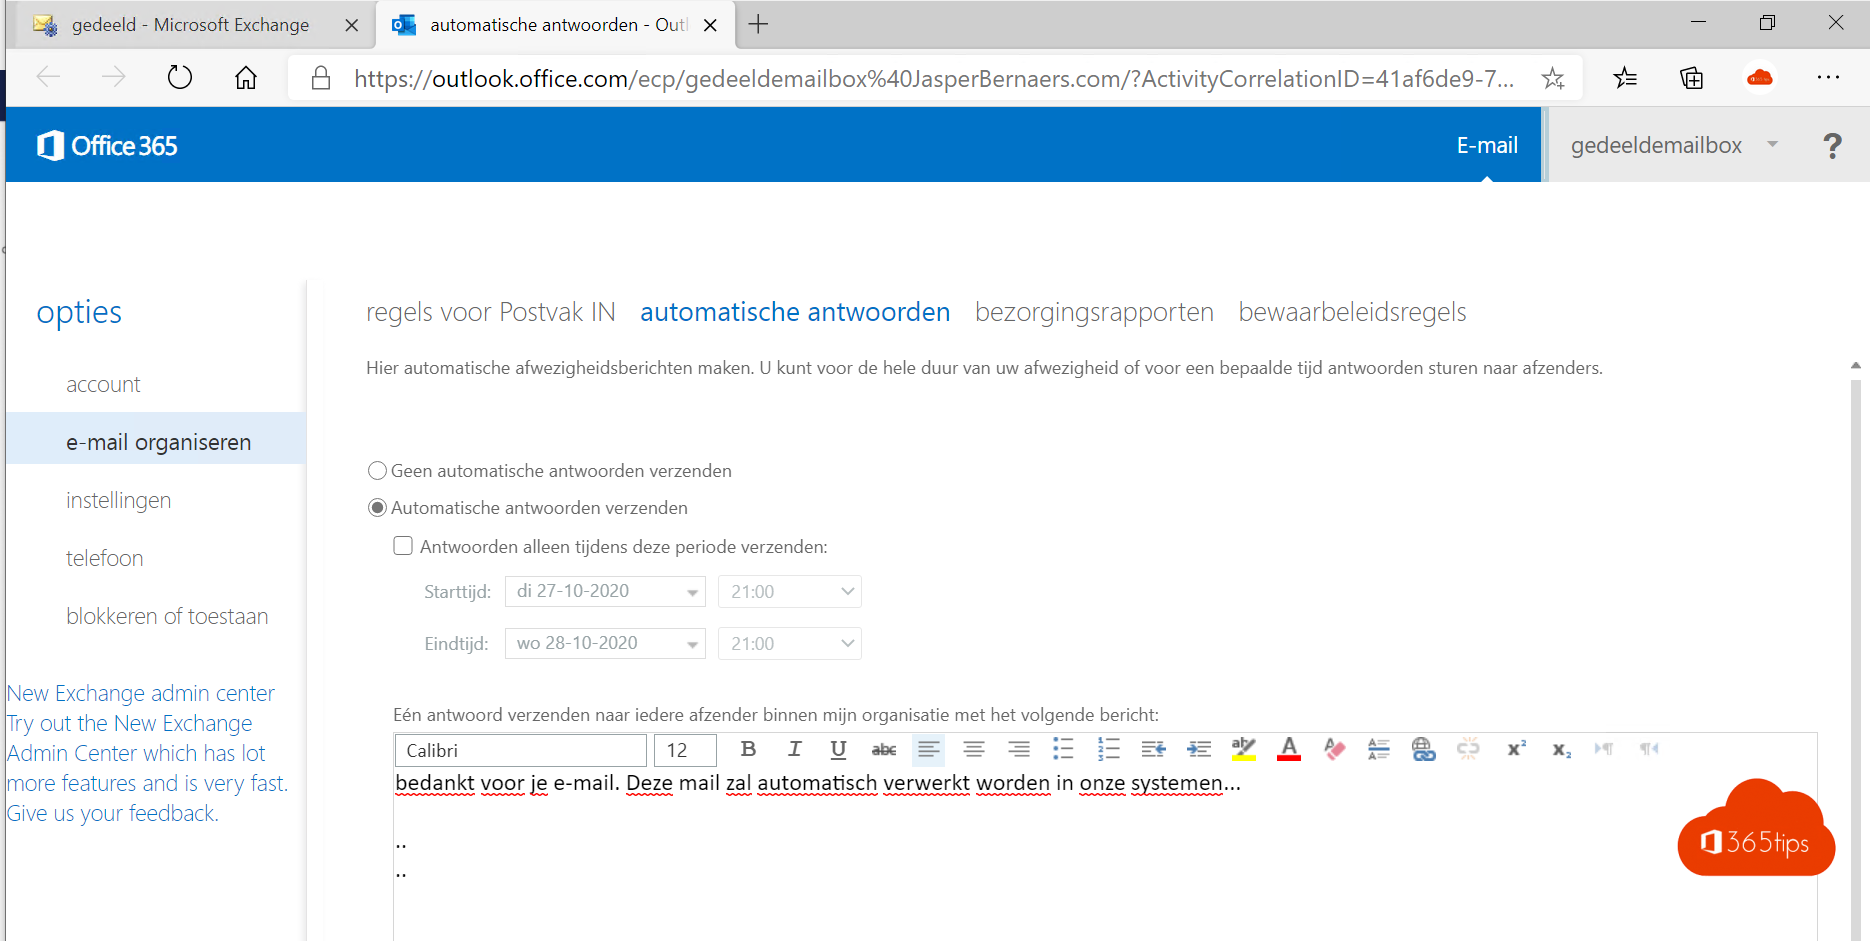 How to set up out-of-office on a Office 365 Shared Mailbox?